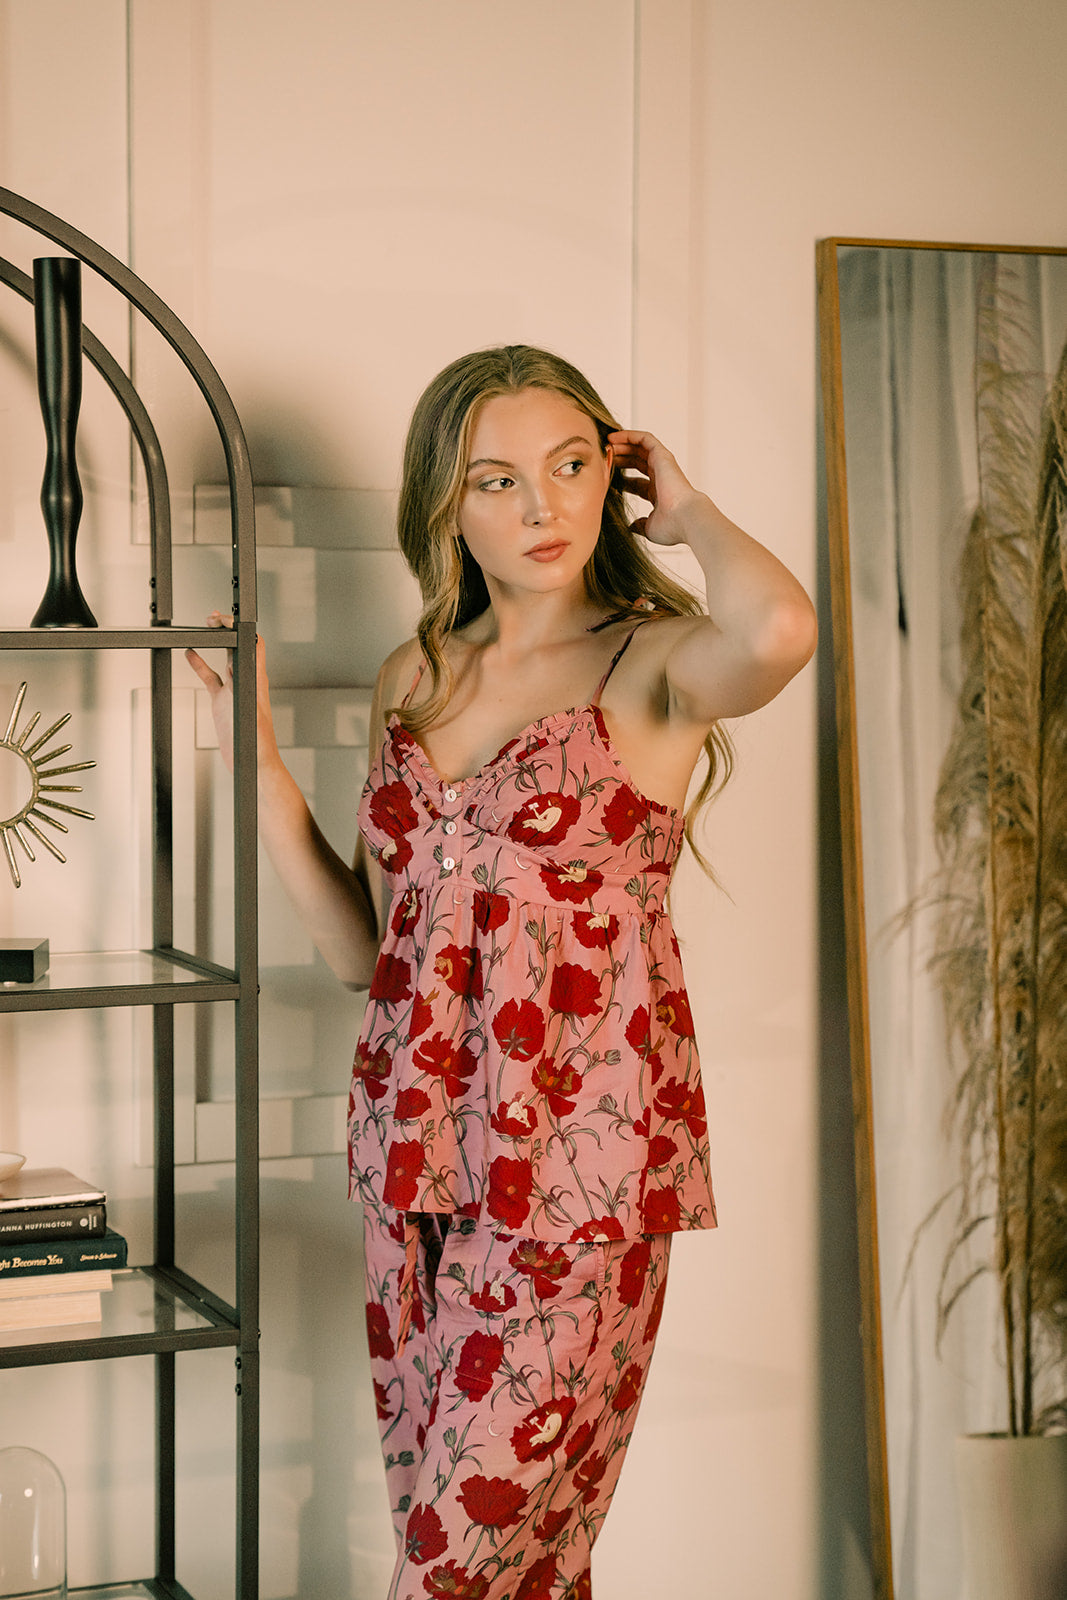 Till Blush Of Night luxury loungewear / pyjama camisole tank top style made out of lightweight Tencel eco-friendly fabric in pink and red colorway 